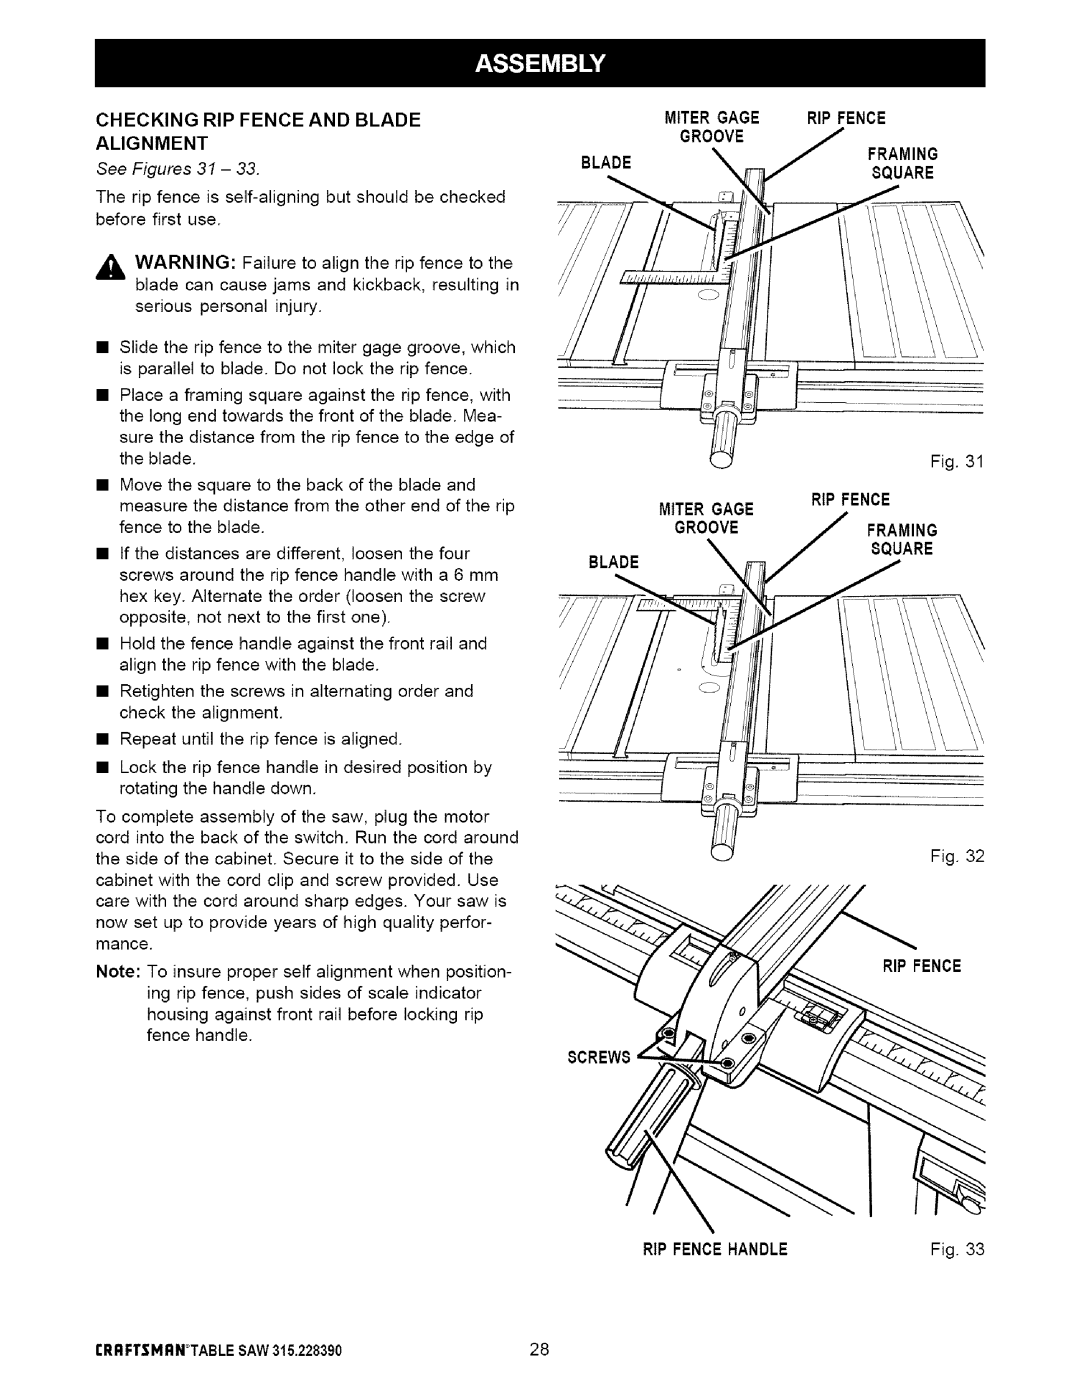 Craftsman 315.22839 owner manual Alignment, Miter Gage Groove Blade Miter Gage Groove, Rip Fence Framing, Rip Fencehandle 